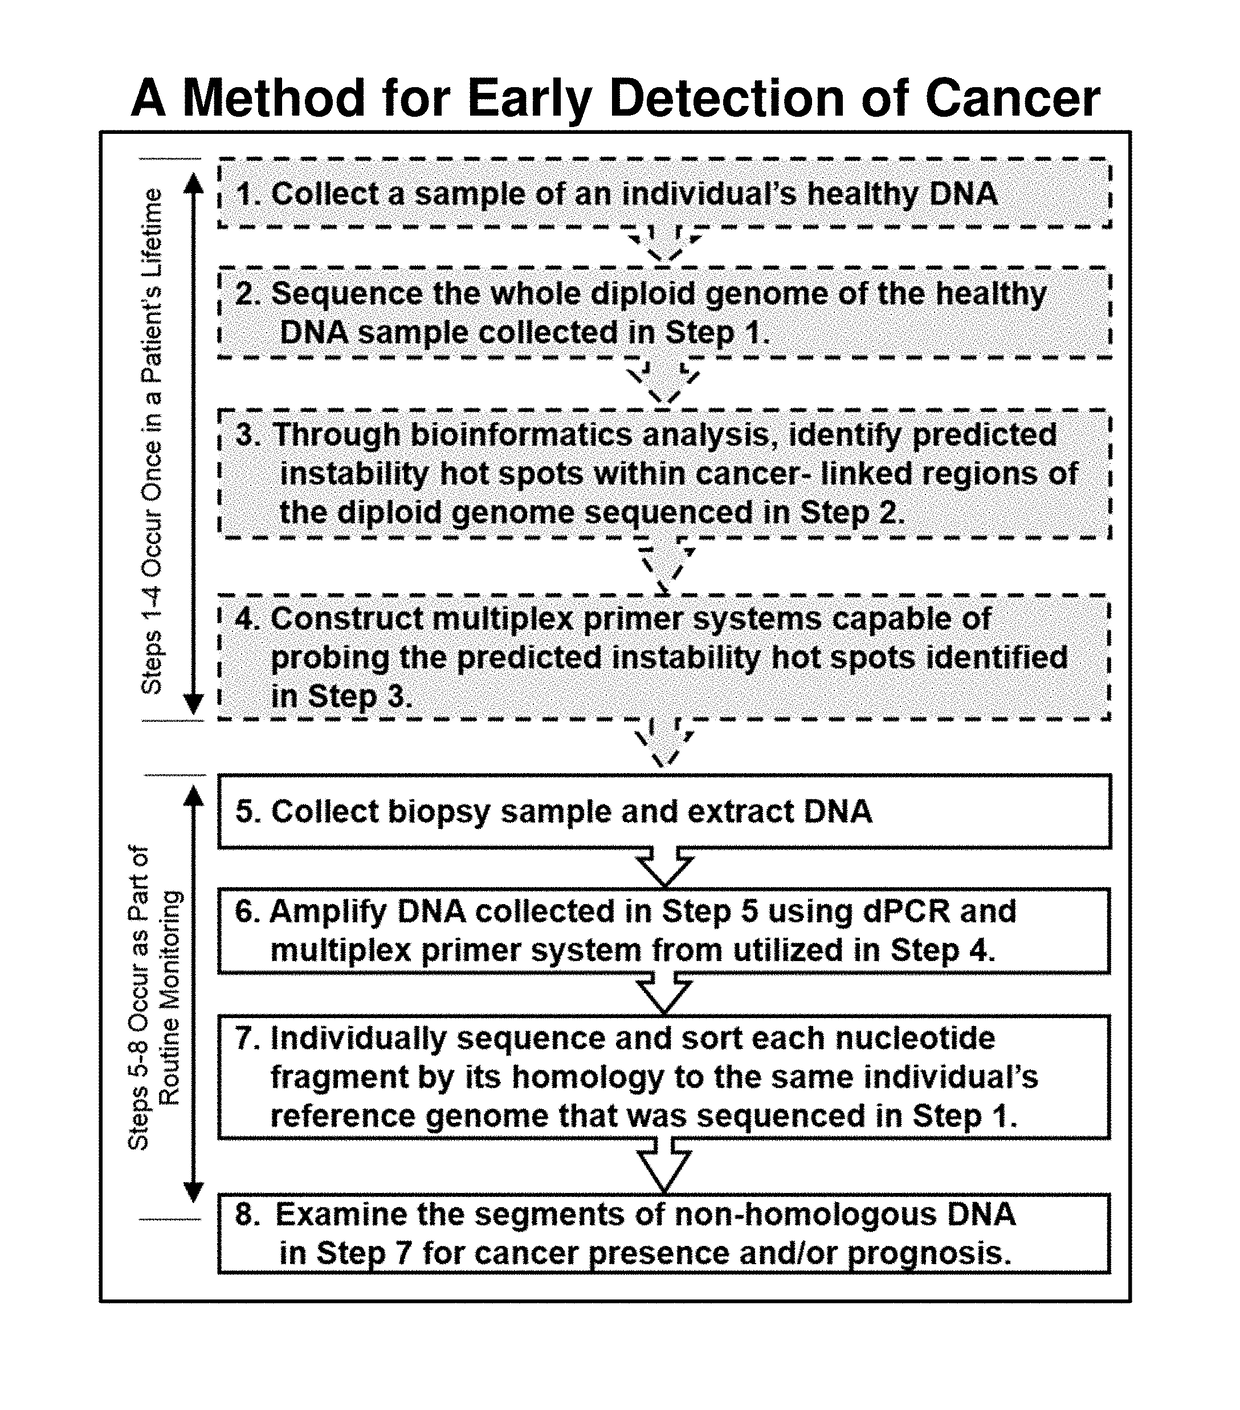 Clinical use of an <i>Alu </i>element based bioinformatics methodology for the detection and treatment of cancer